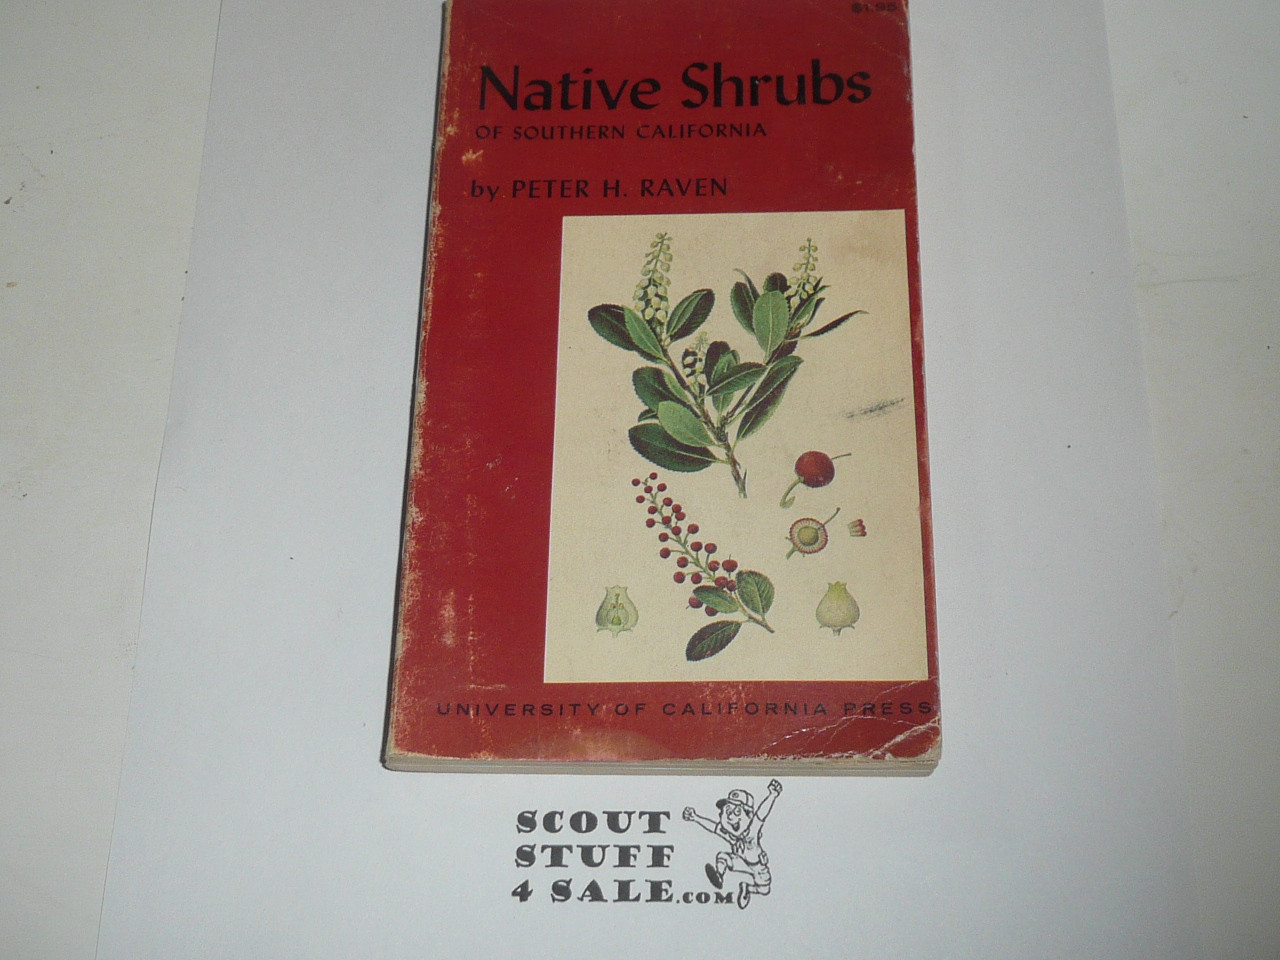 Native Shrubs of Southern California, by Peter H. Raven, 1966